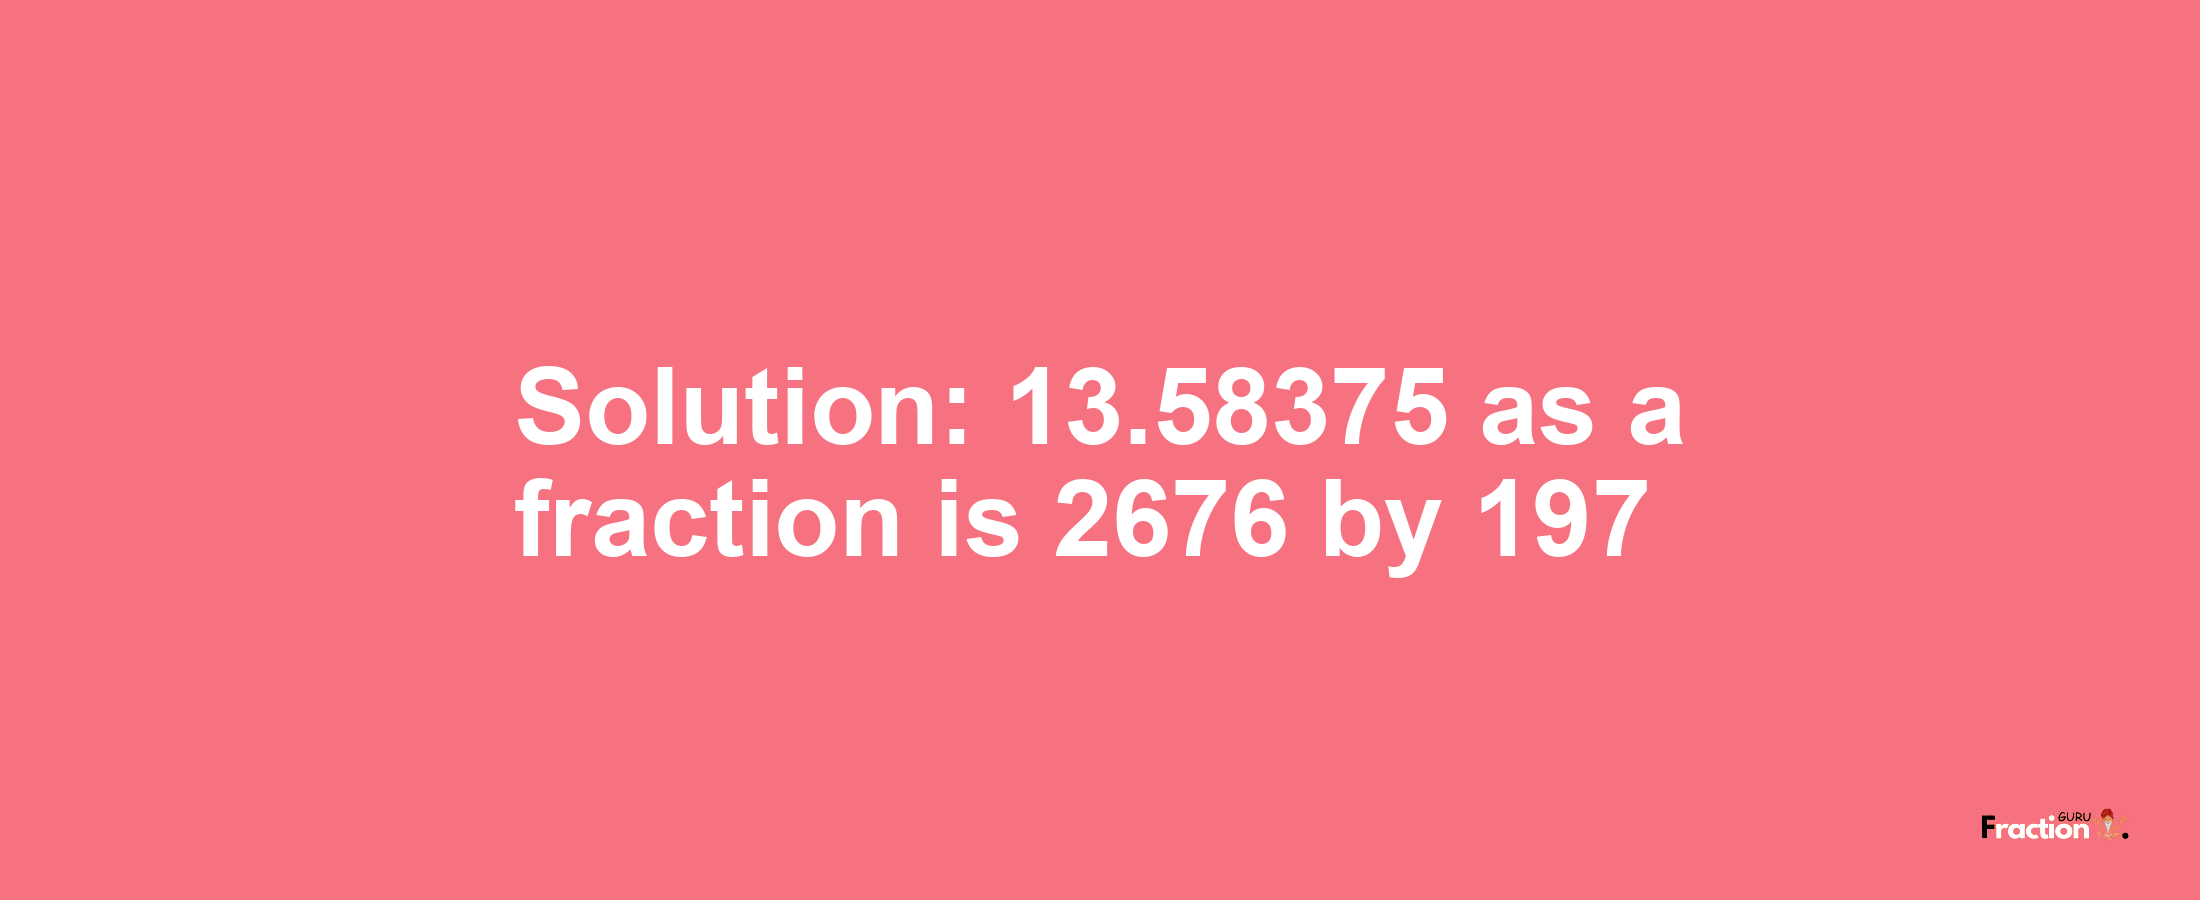 Solution:13.58375 as a fraction is 2676/197